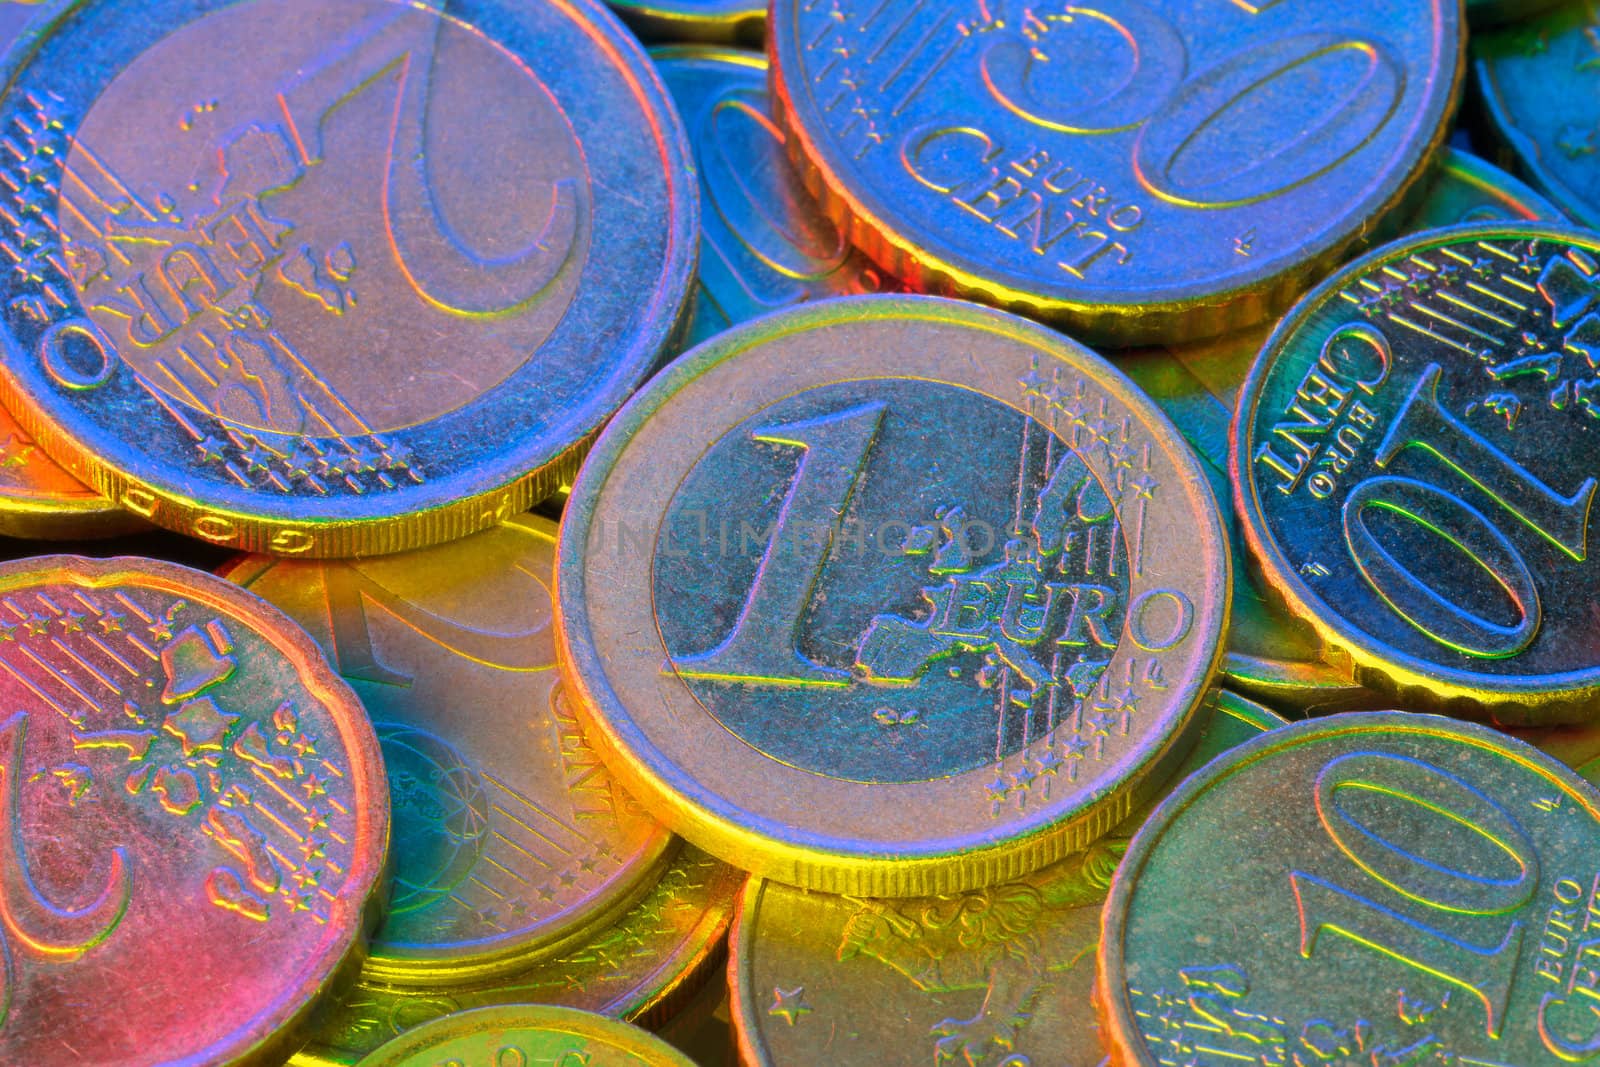 Euro coins, illuminated by colored light by Antartis